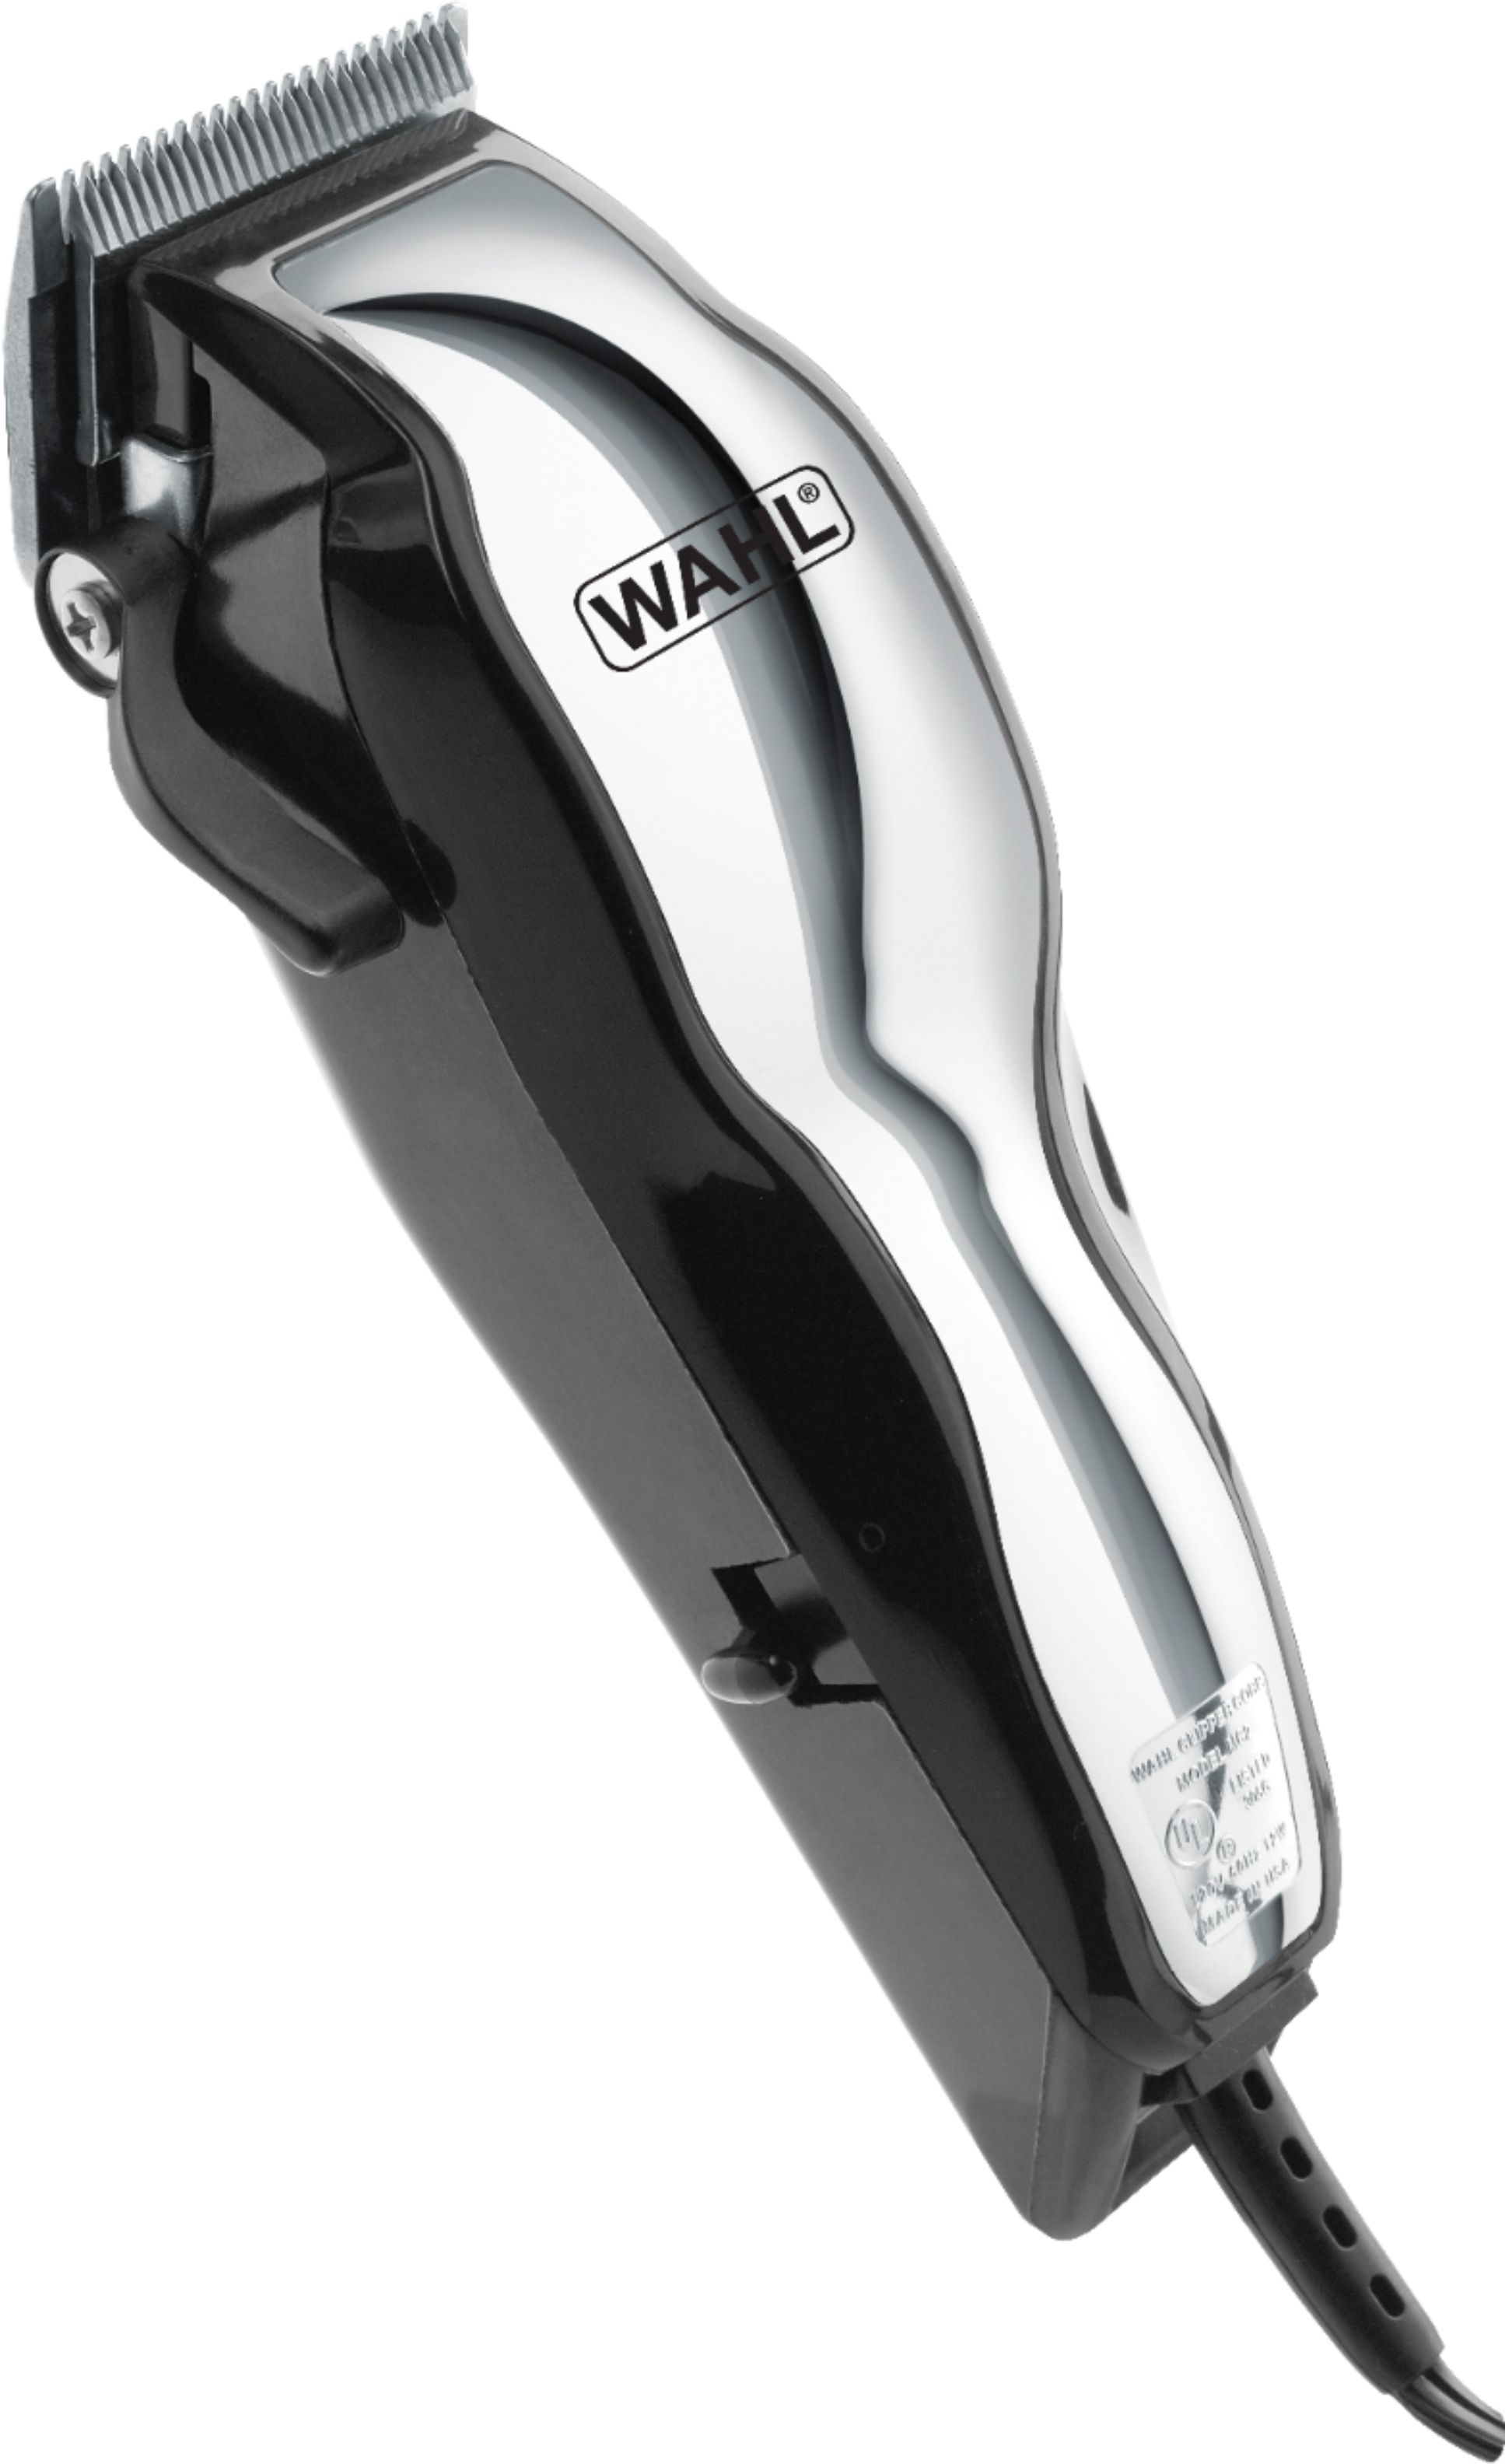 wahl trimmer for hair